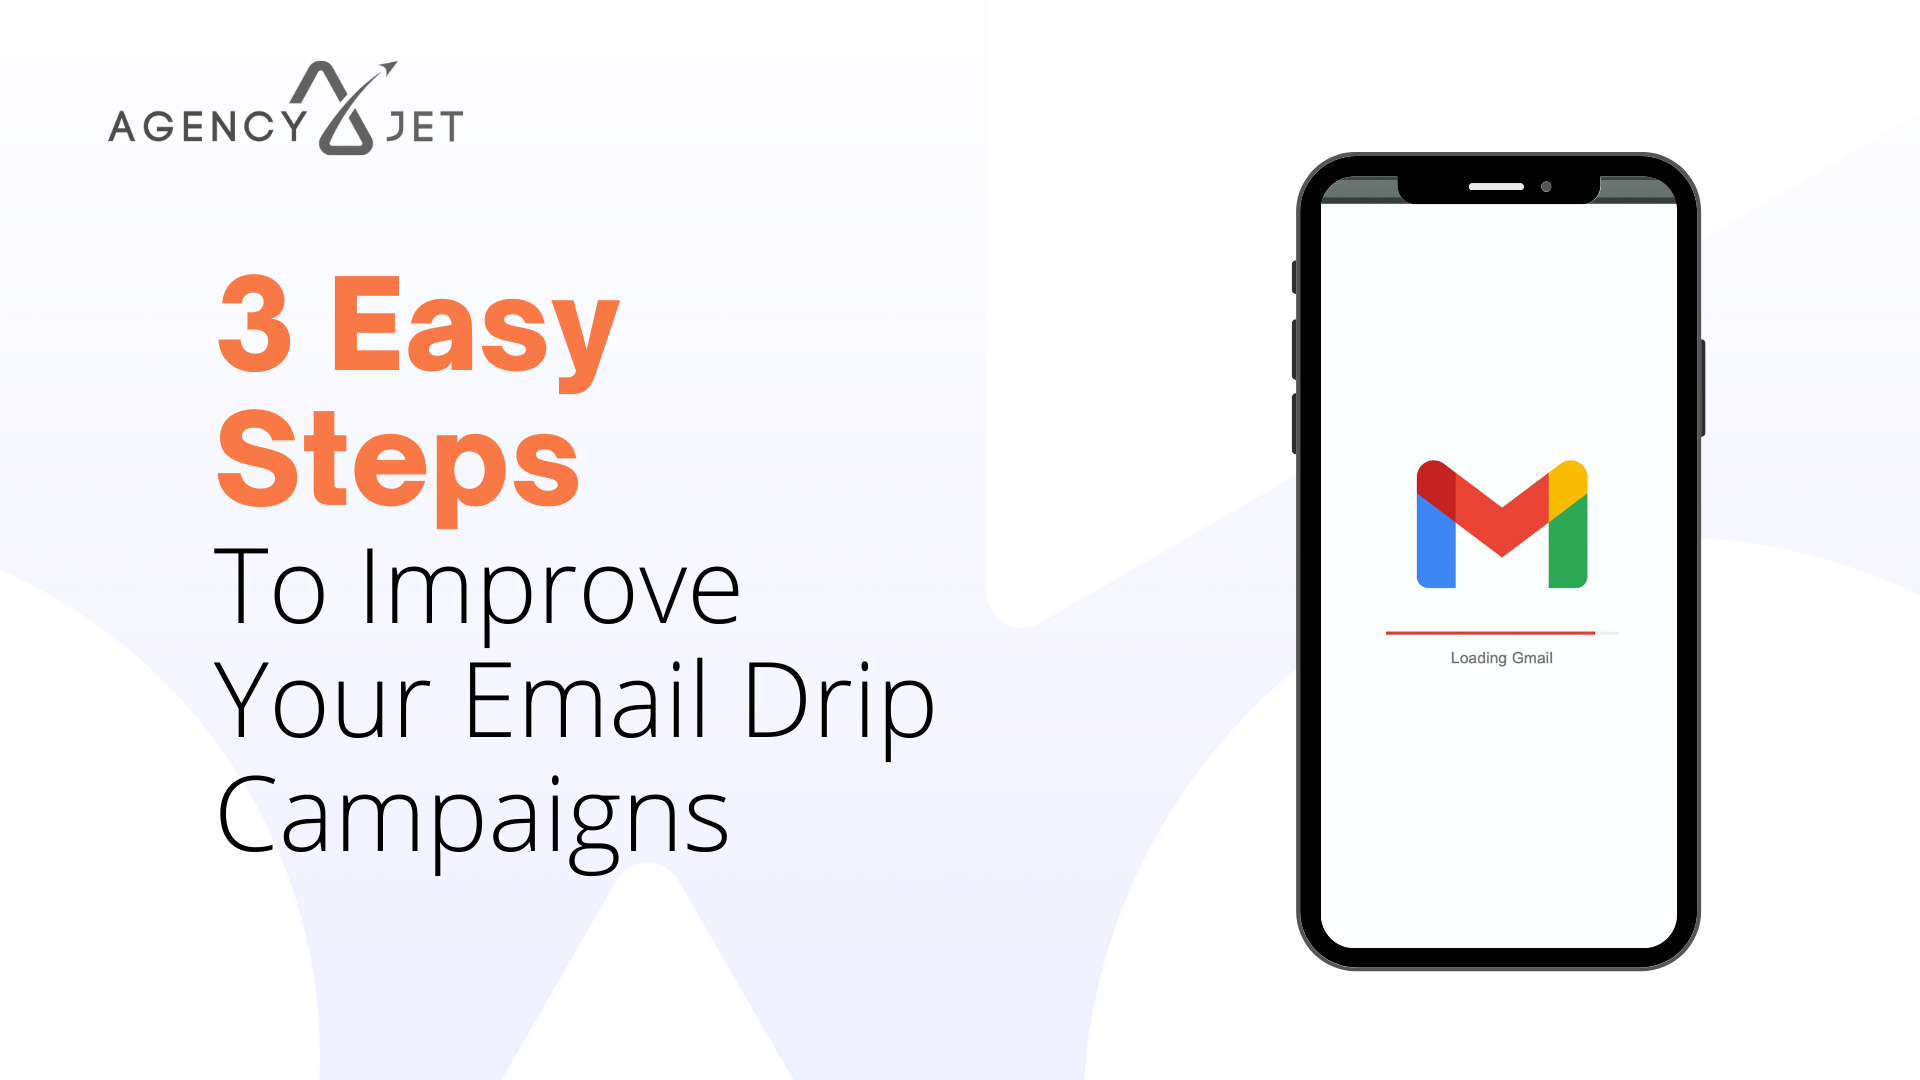 3 Easy Steps To Improve Your Email Drip Campaigns - Agency Jet